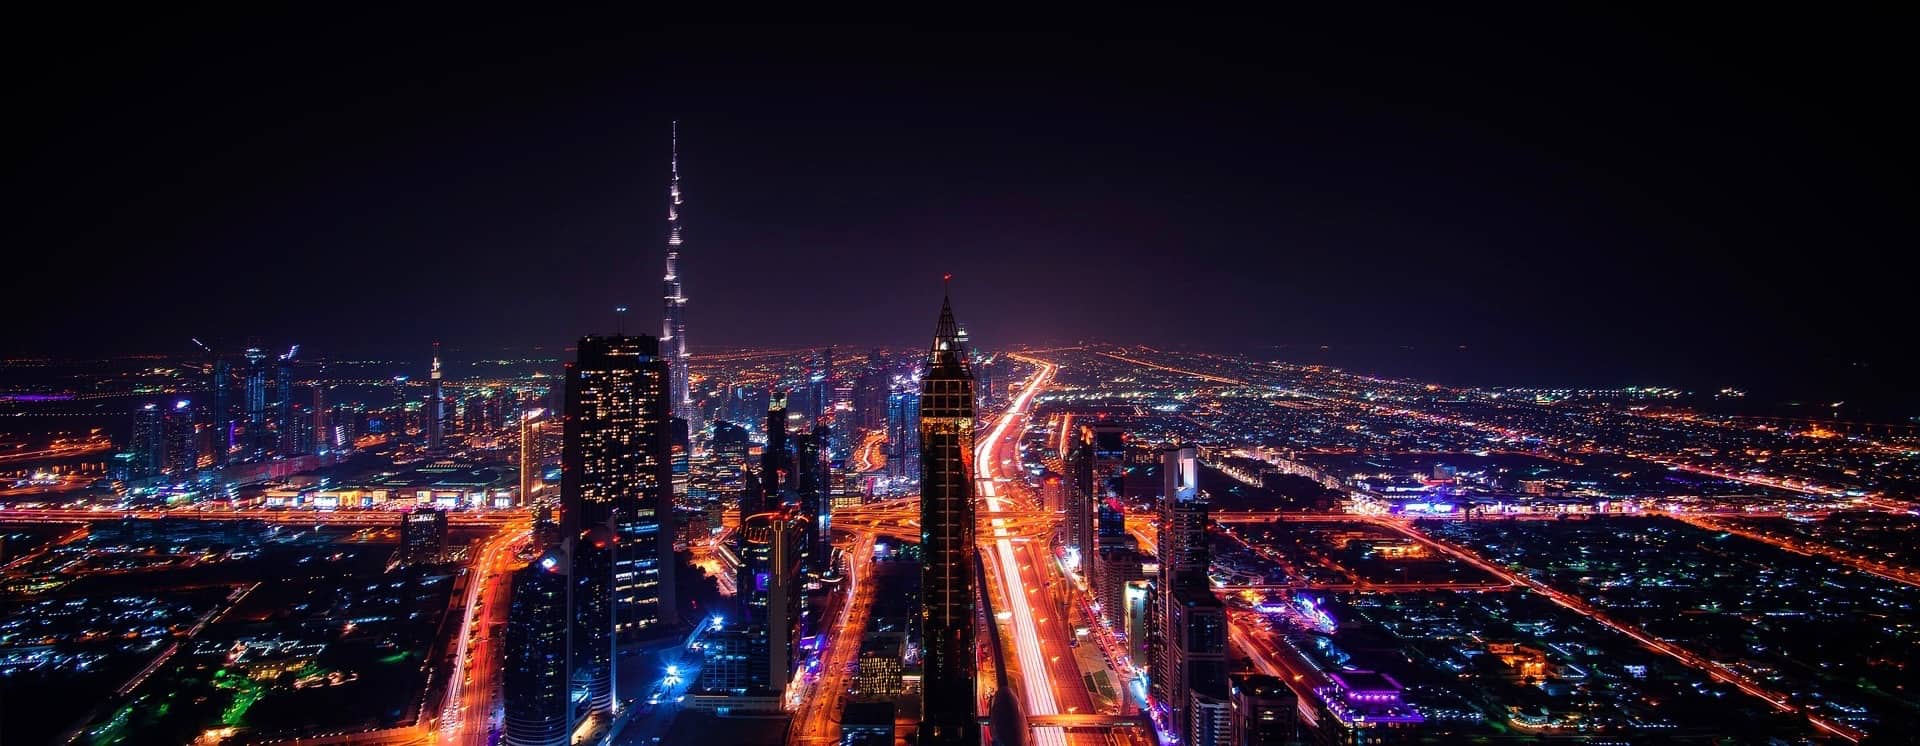 The towering and iconic Dubai skyline lit up at night